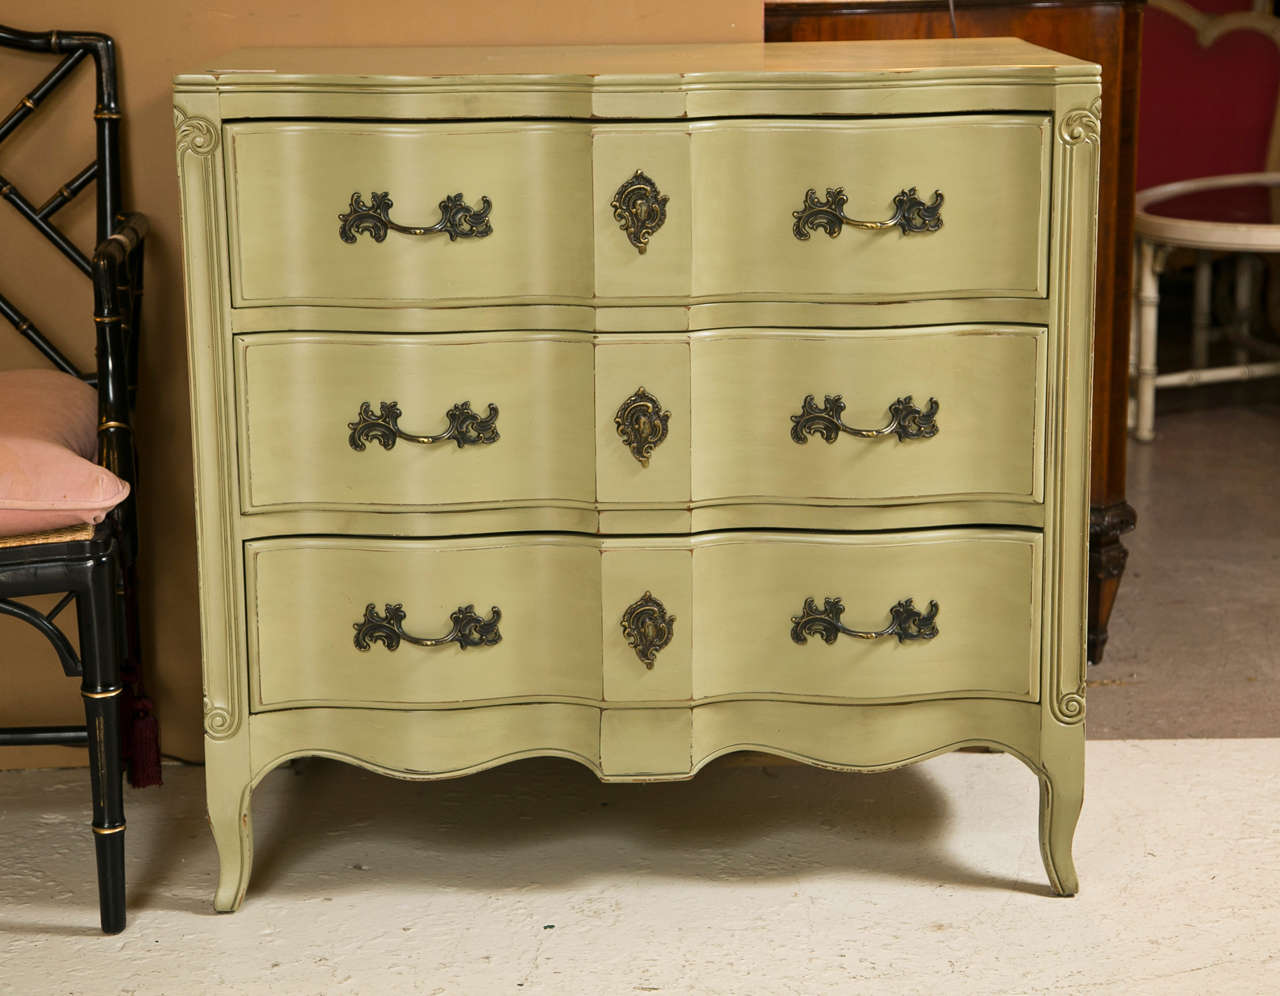 Pair of green painted French Provincial chests of drawers, each has a serpentine top, the enclosed case fitted with three drawers, raised on a scalloped apron and cabriole legs.